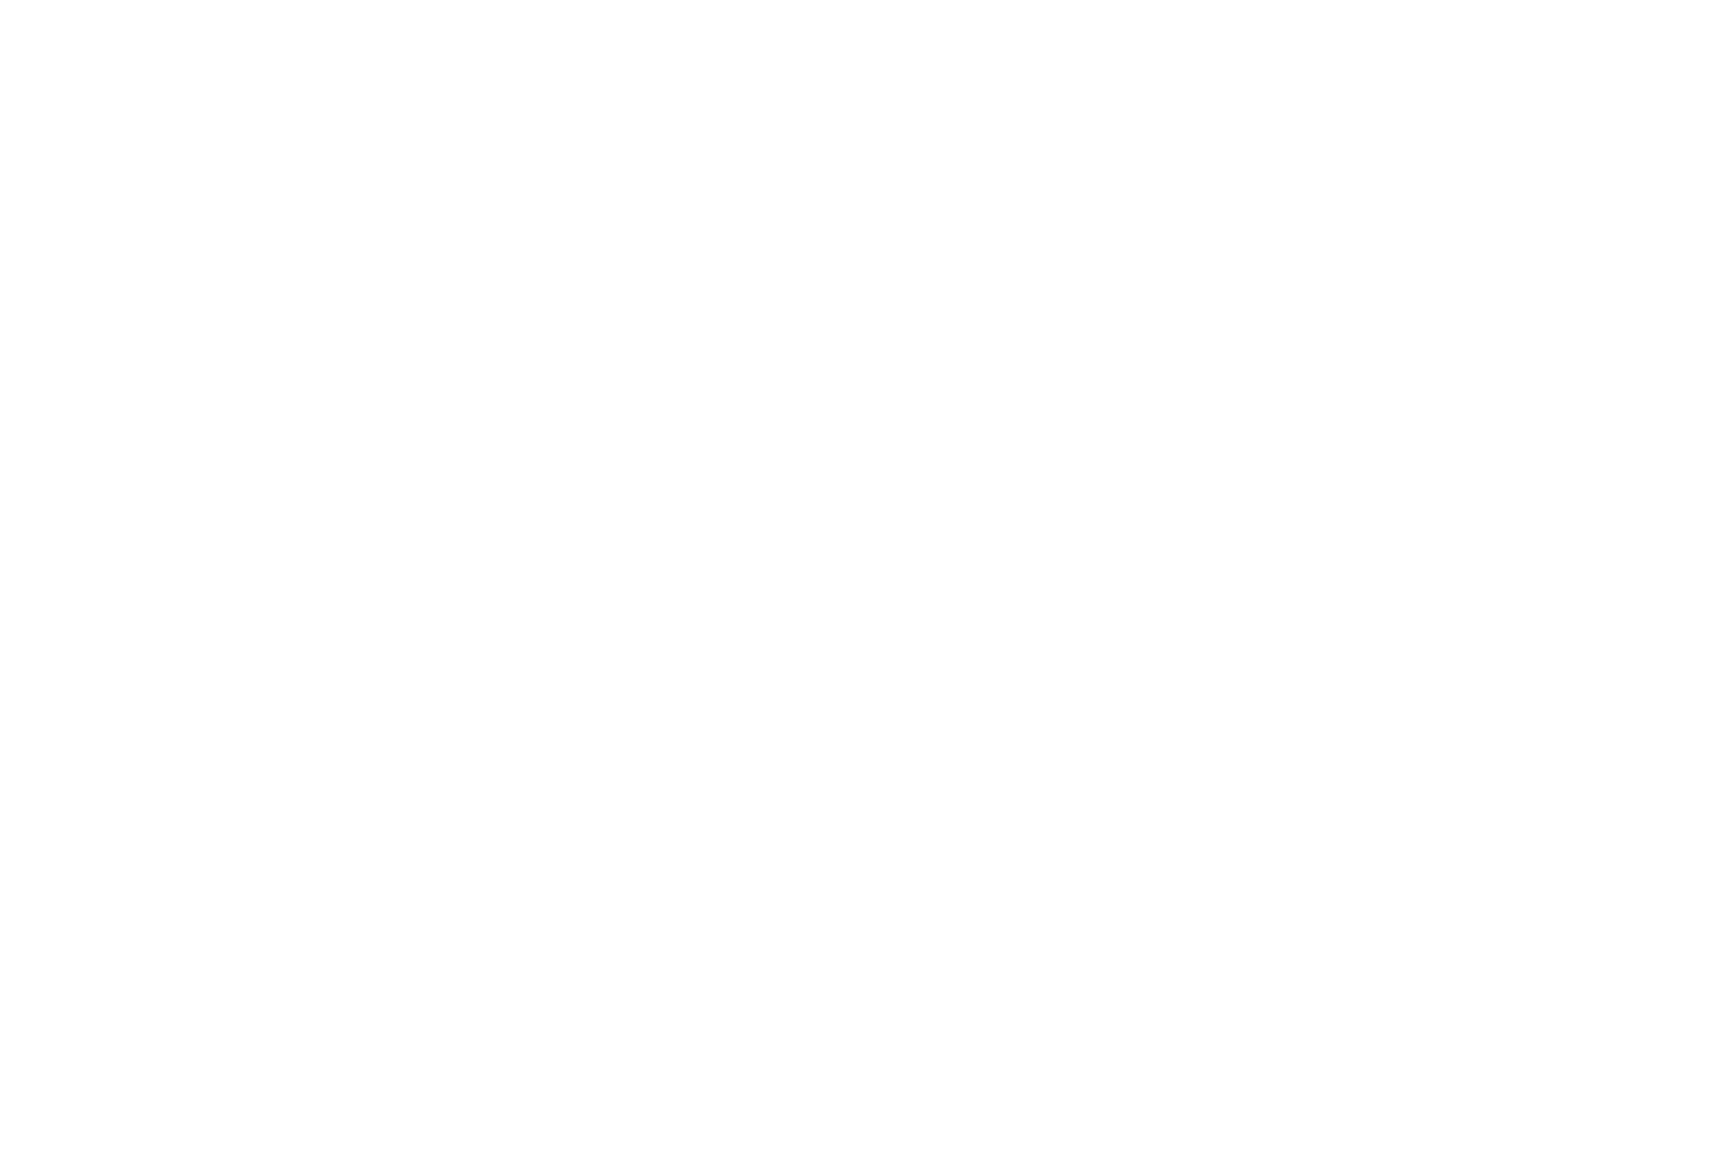 WINNER  - AWARD OF EXCELLENCE  - BEST SHORTS COMPETITION 2016 (1).png